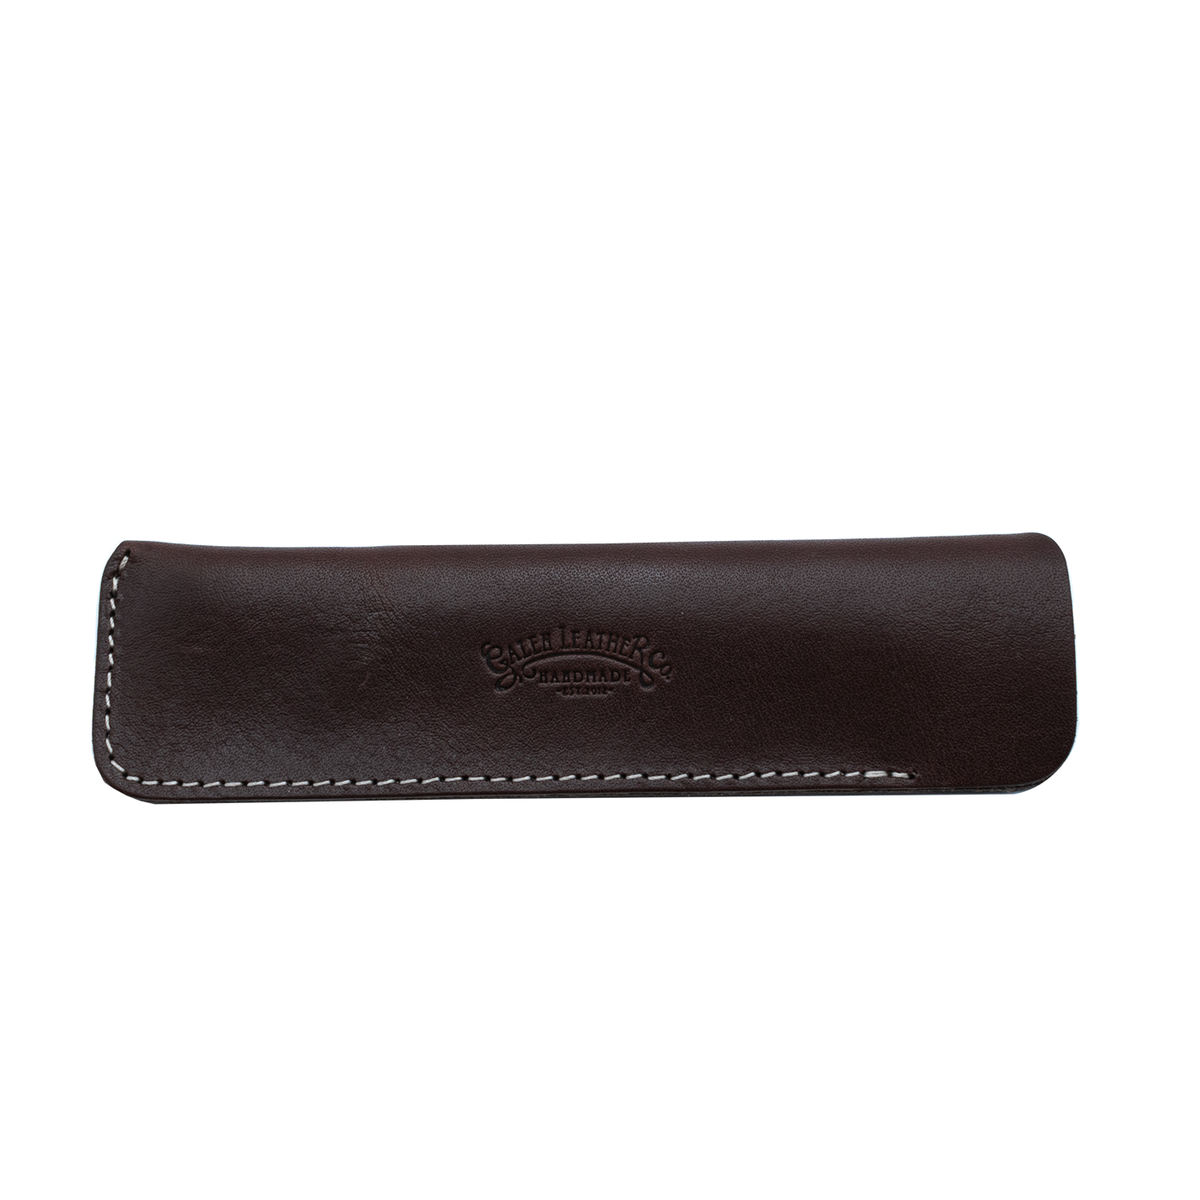 Galen Leather Co. Leather Single Pen Sleeve - Dark Brown